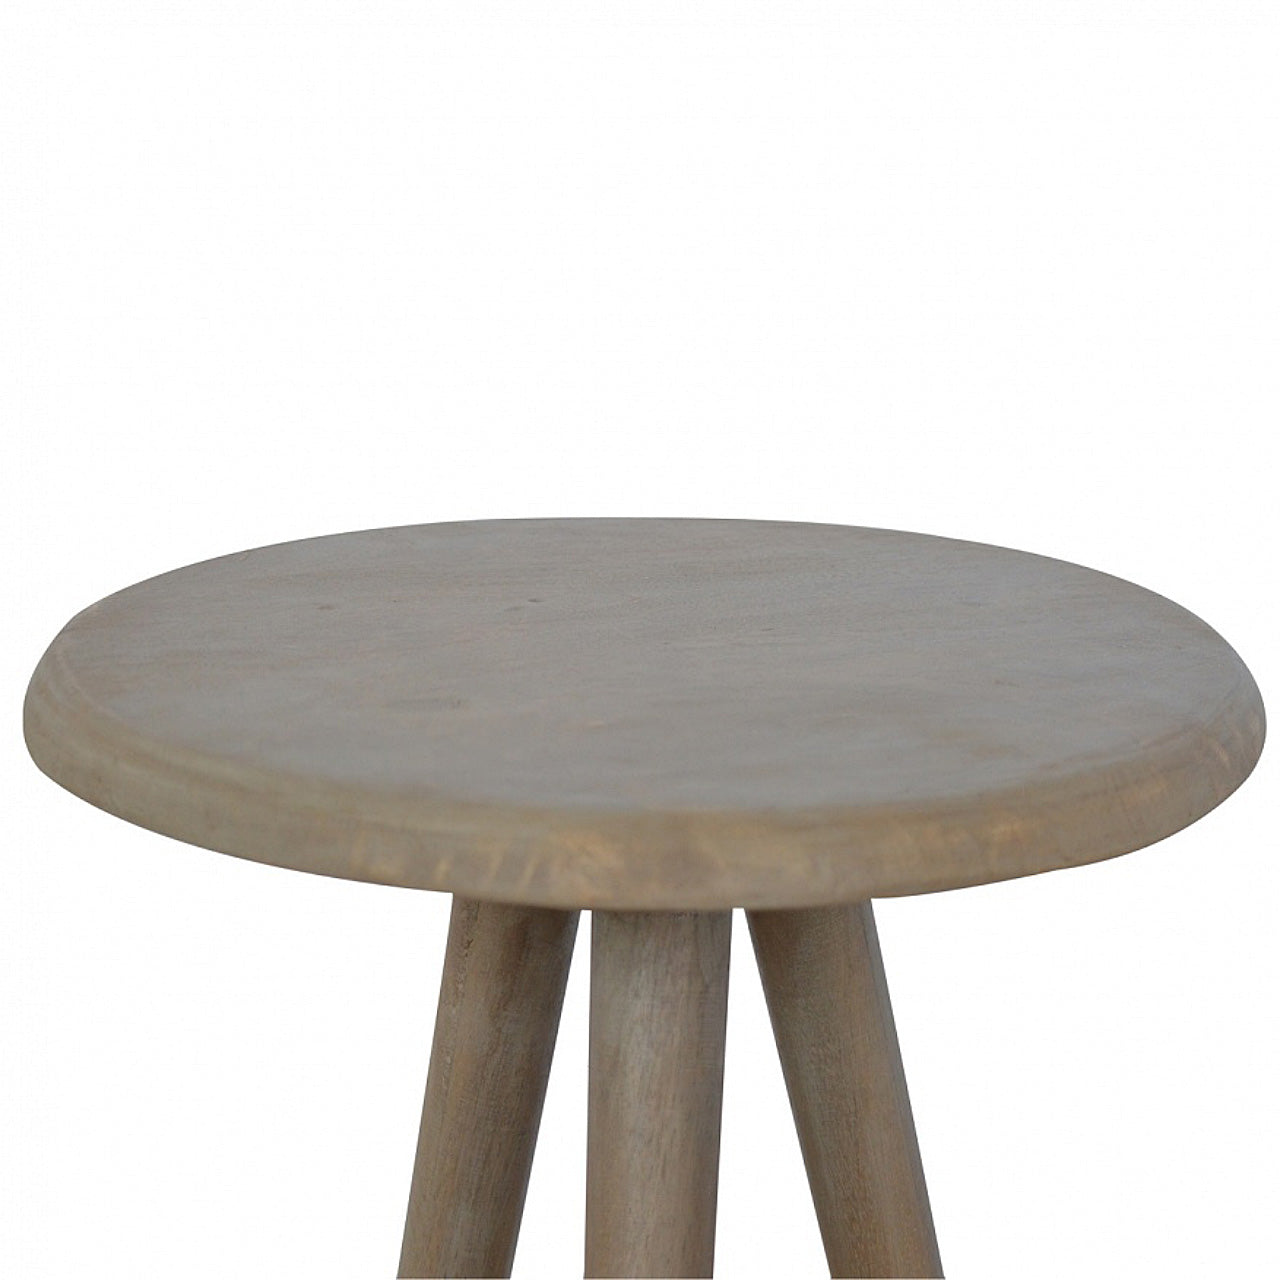 View Lulu Round Tripod End Table information